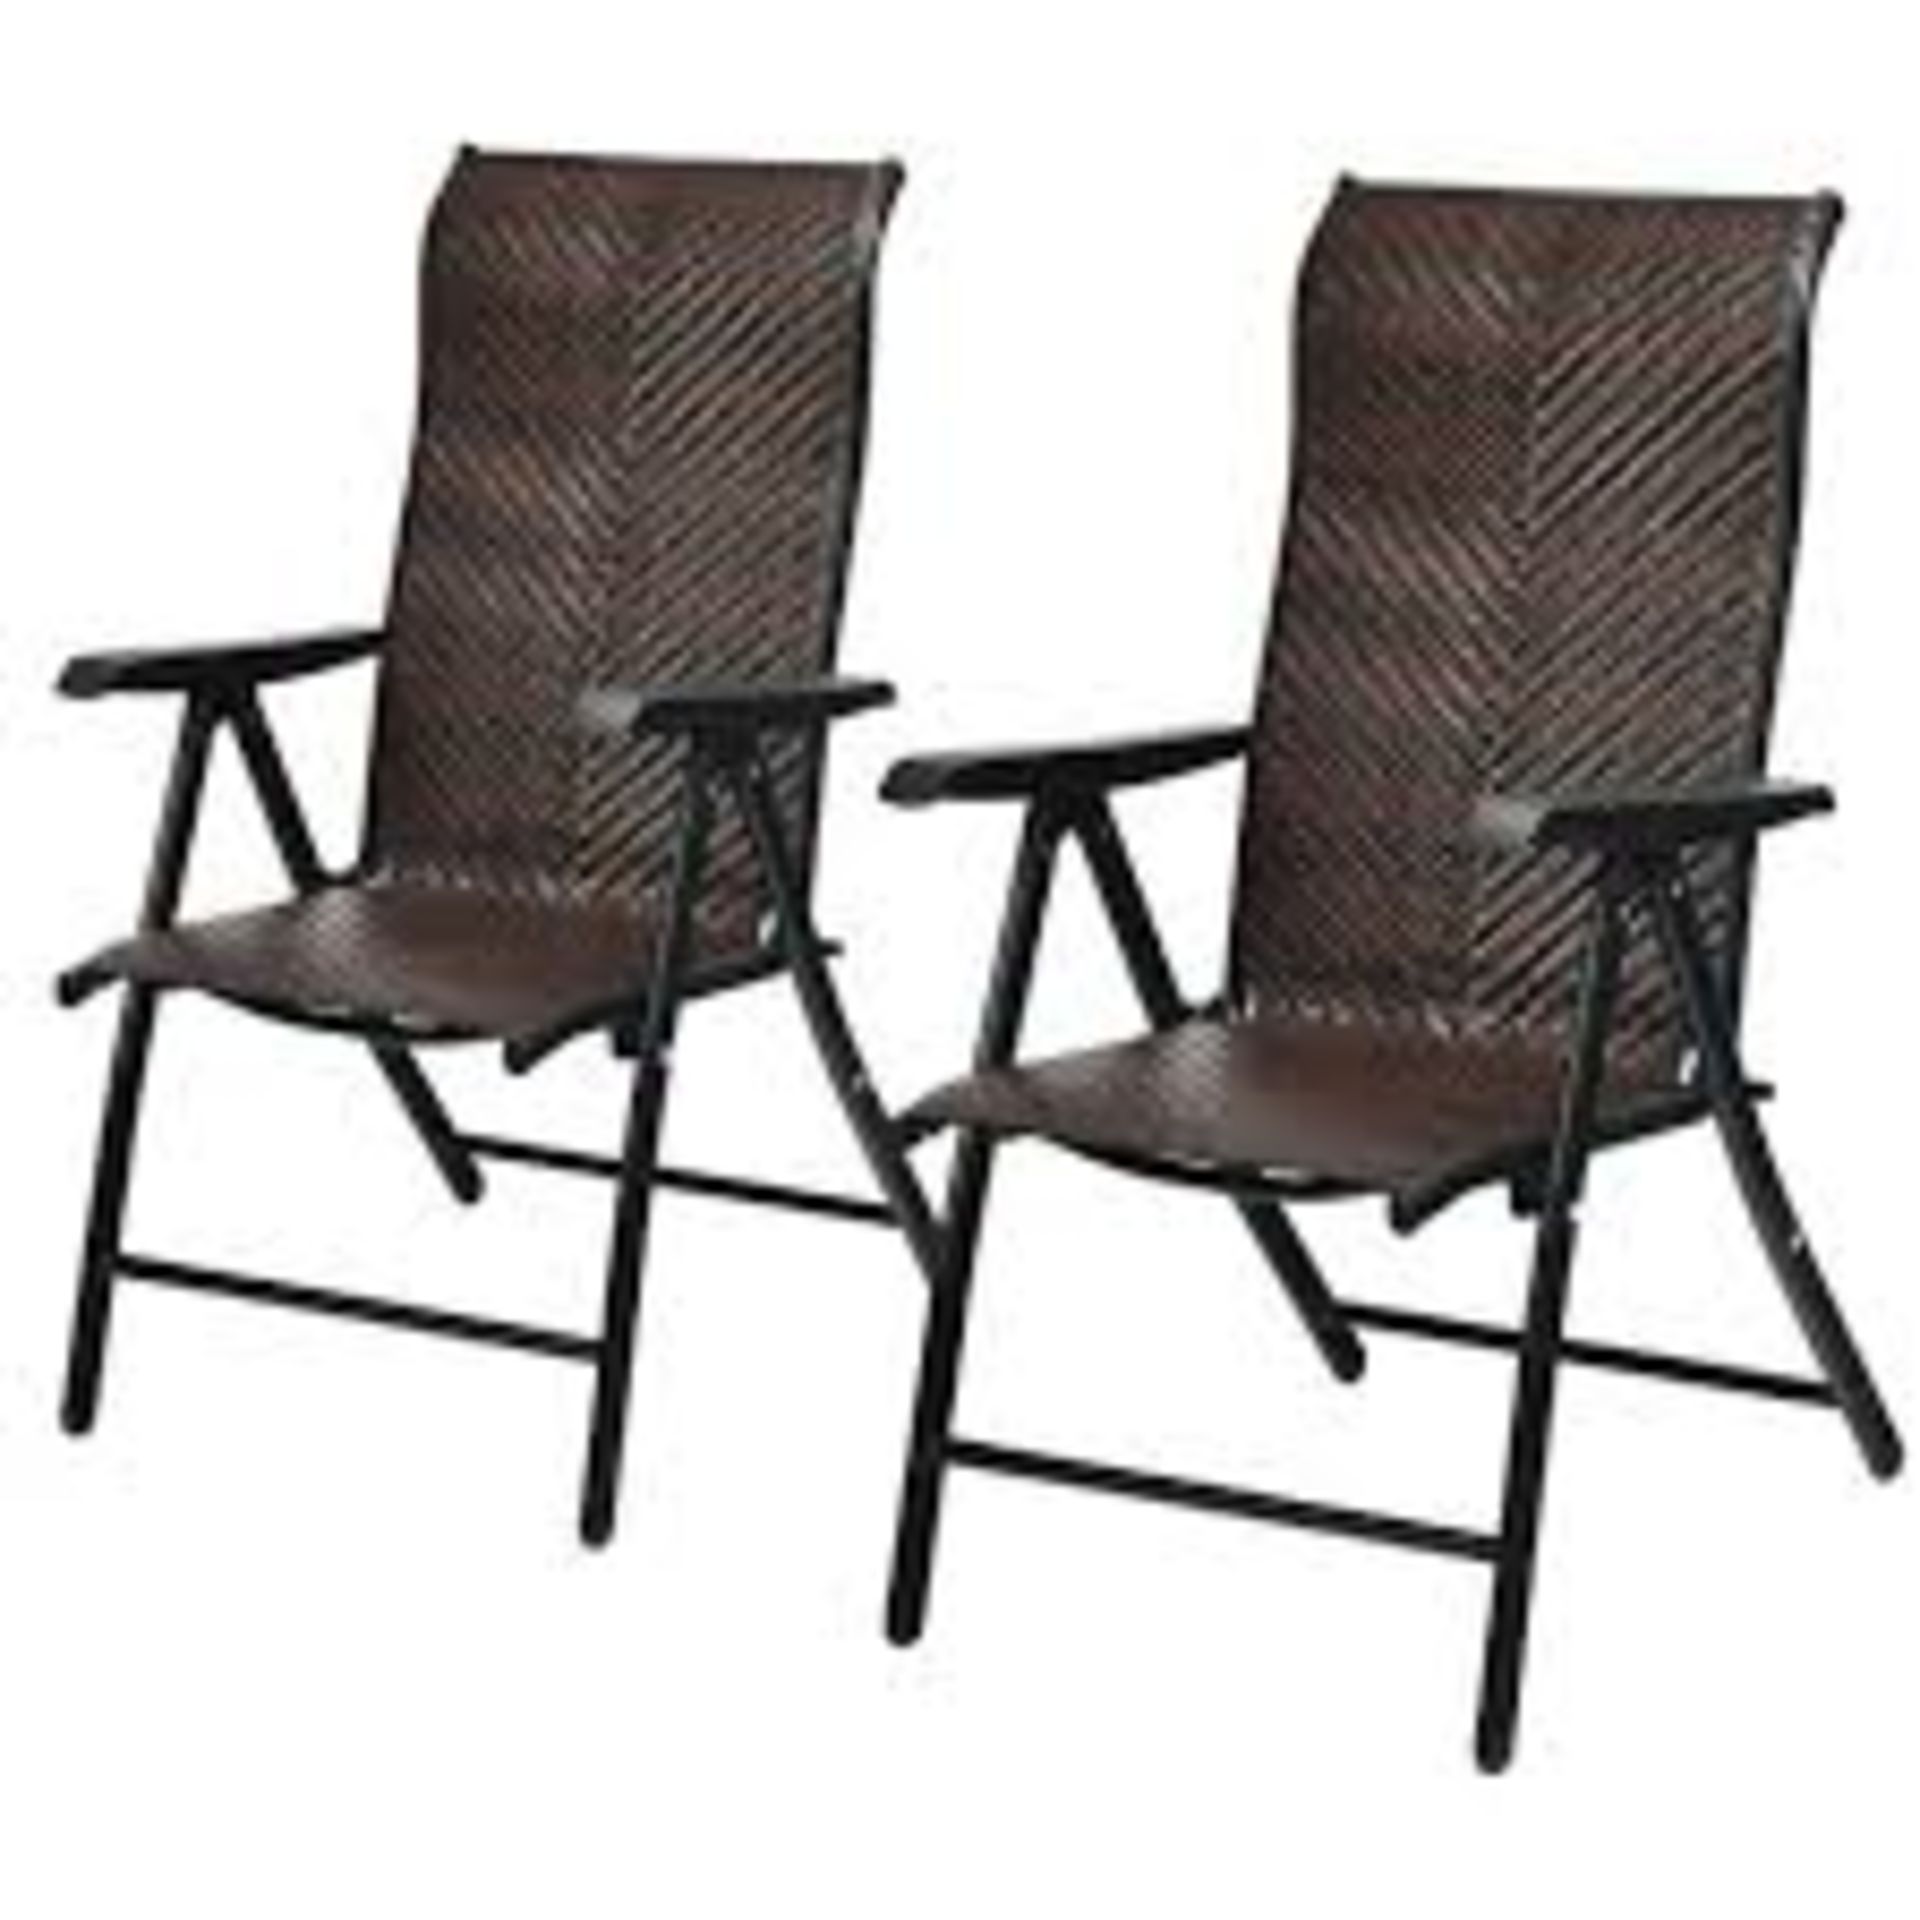 Set of 2 Folding Reclining Rattan Chair with Widened Armrest. - R13a.9.